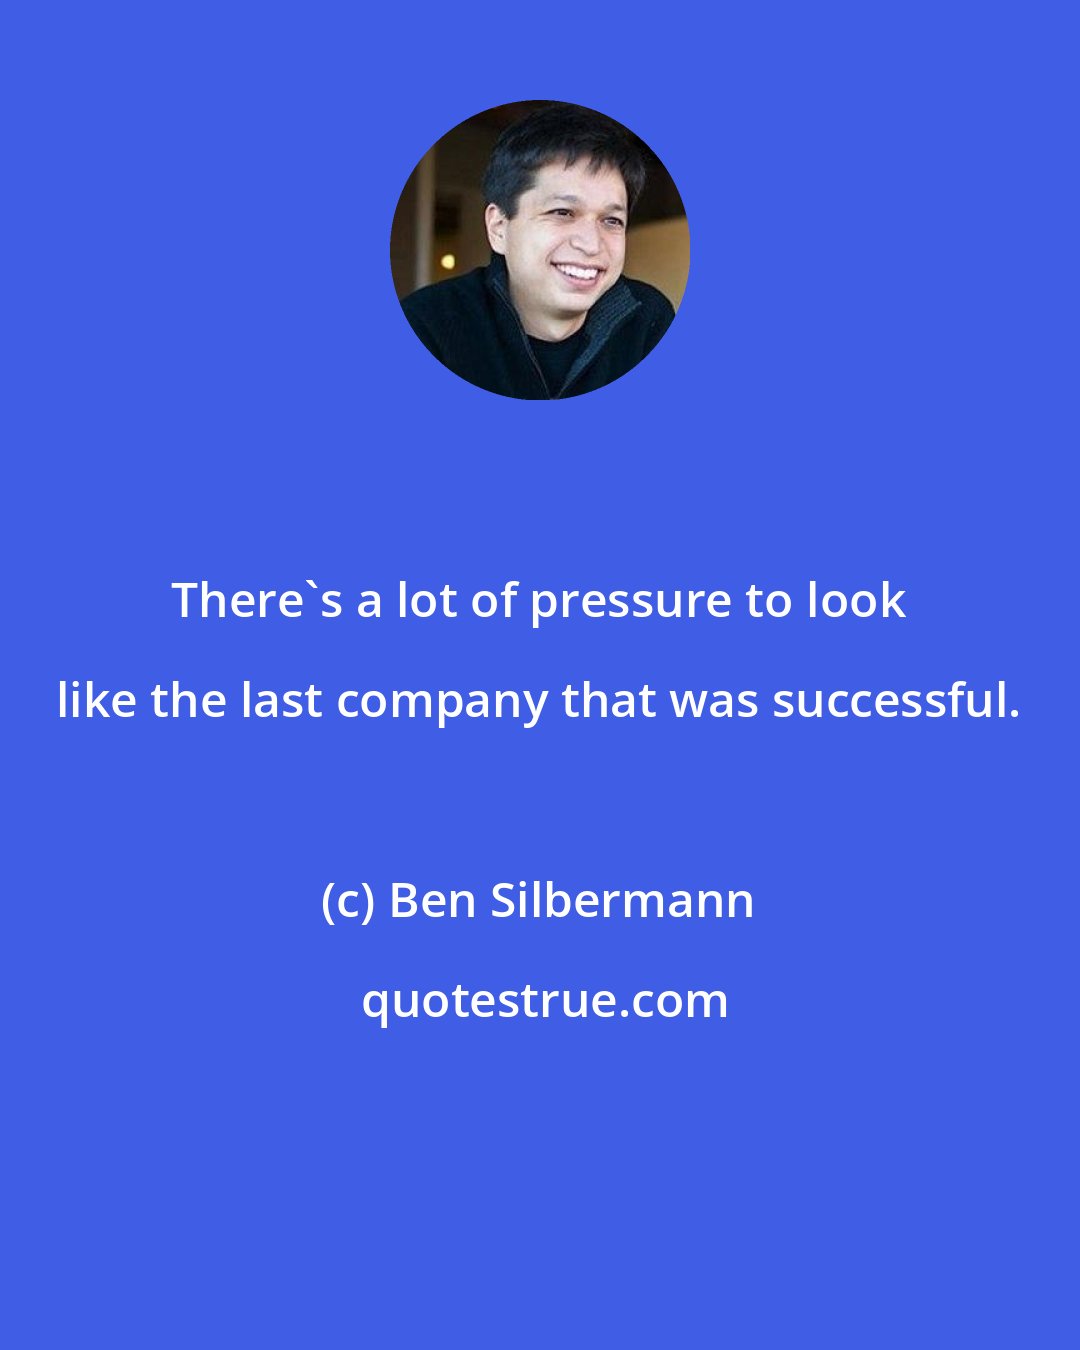 Ben Silbermann: There's a lot of pressure to look like the last company that was successful.